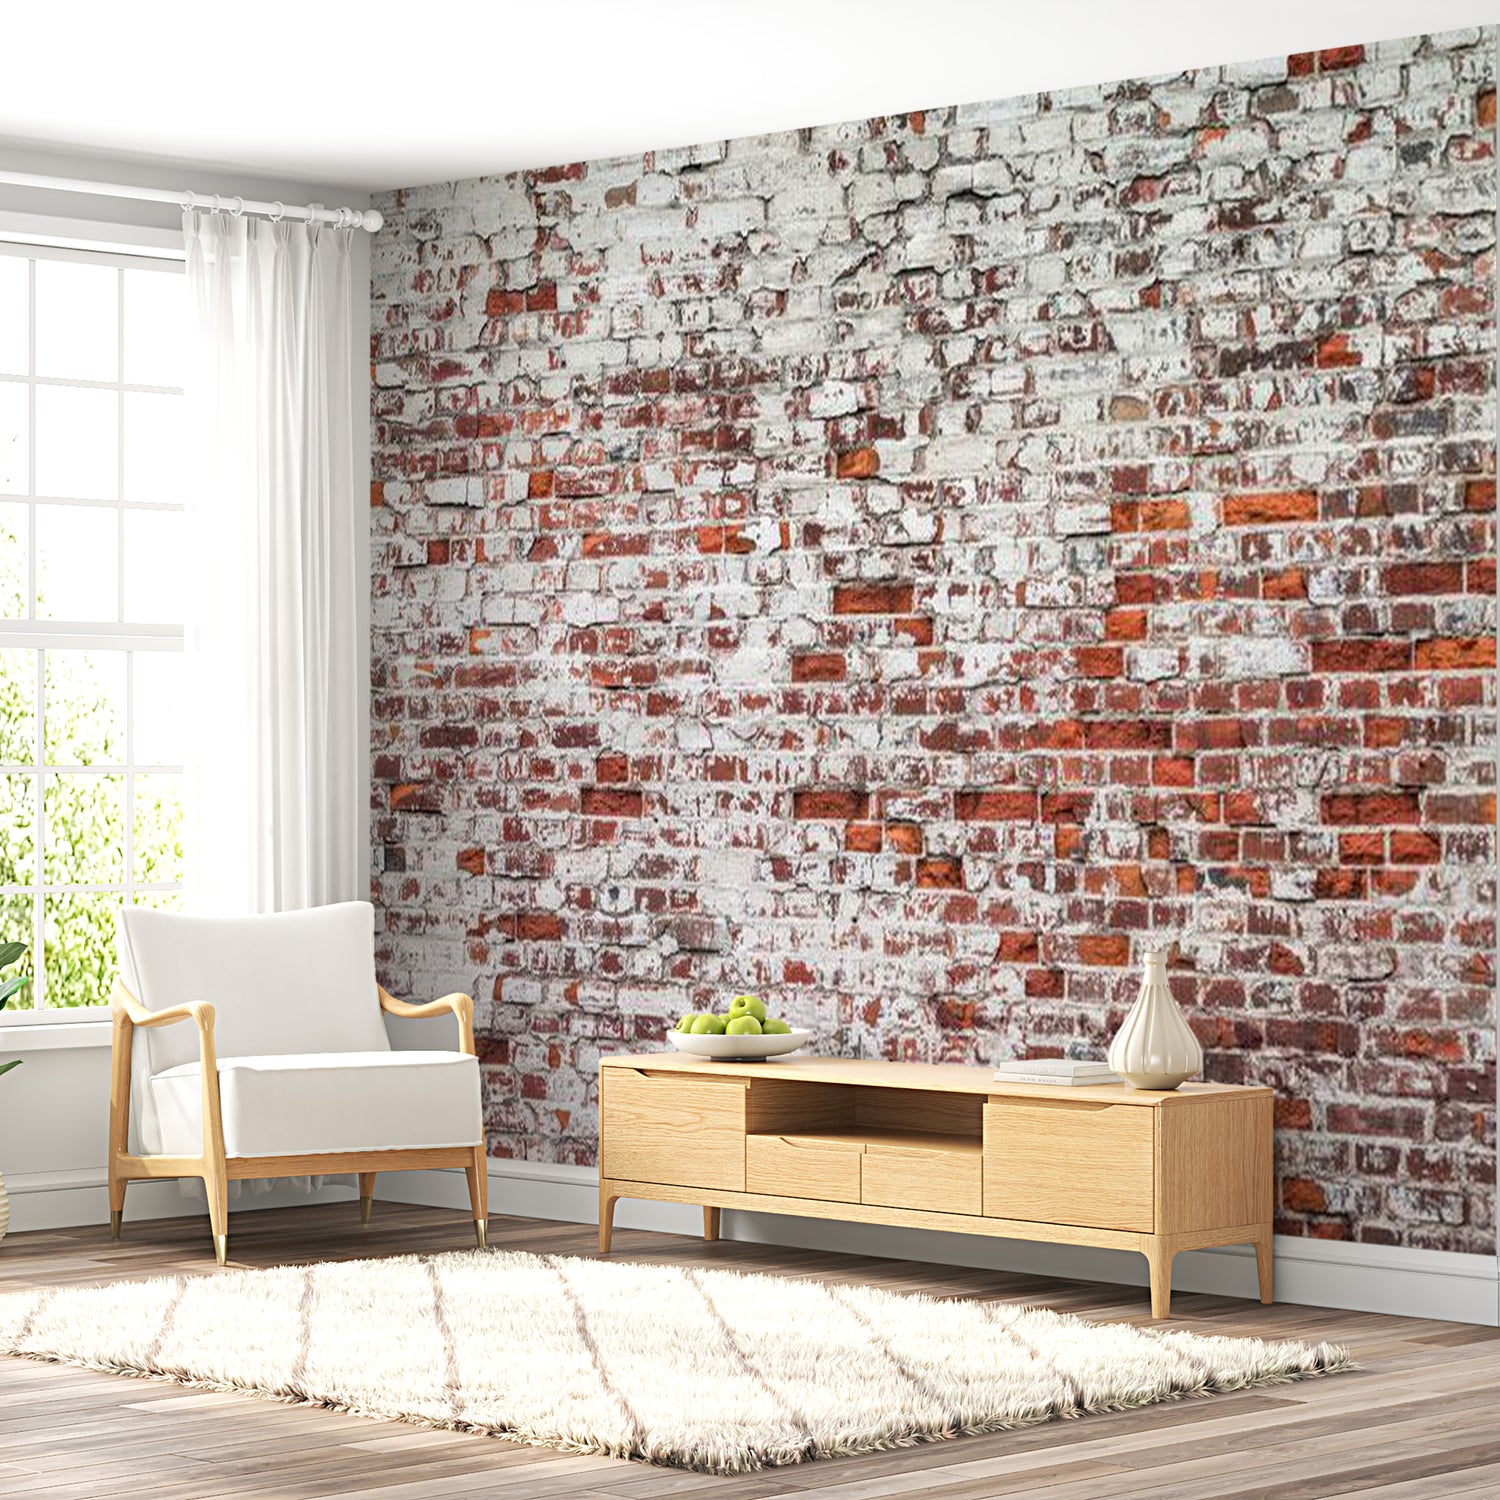 Peel & Stick XXL Wall Mural - Red White Brick Wall - Removable Wall Decals